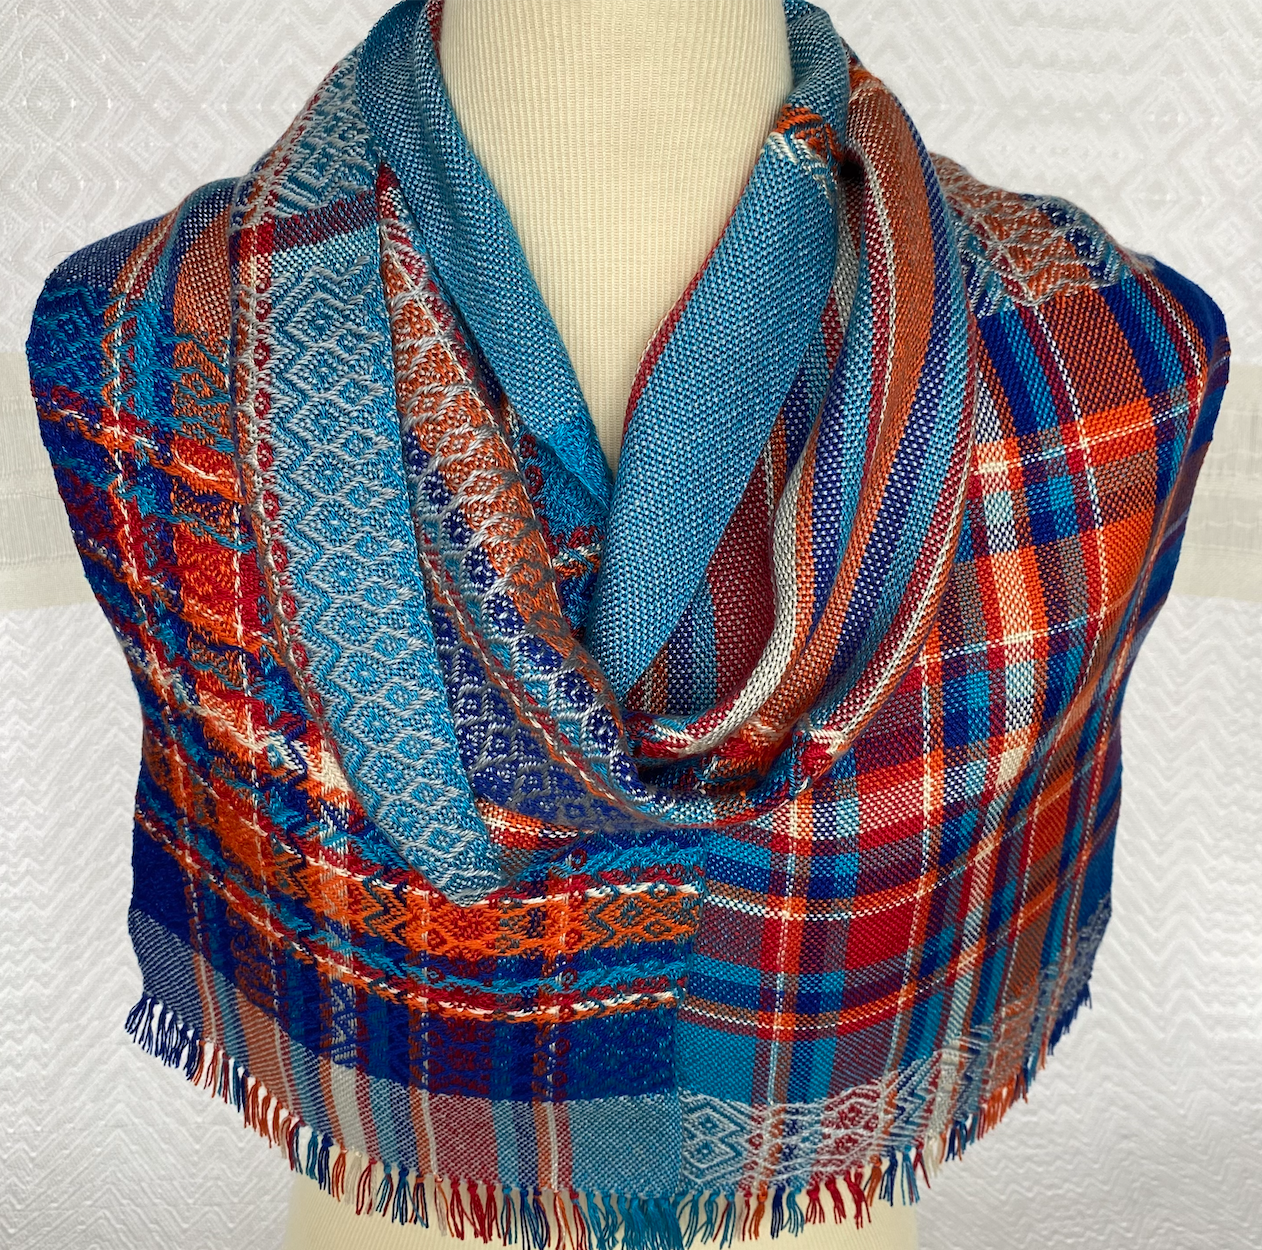  Stripes of Blue, Red, Orange and Cream Plaid with Silver Handwoven Scarf       